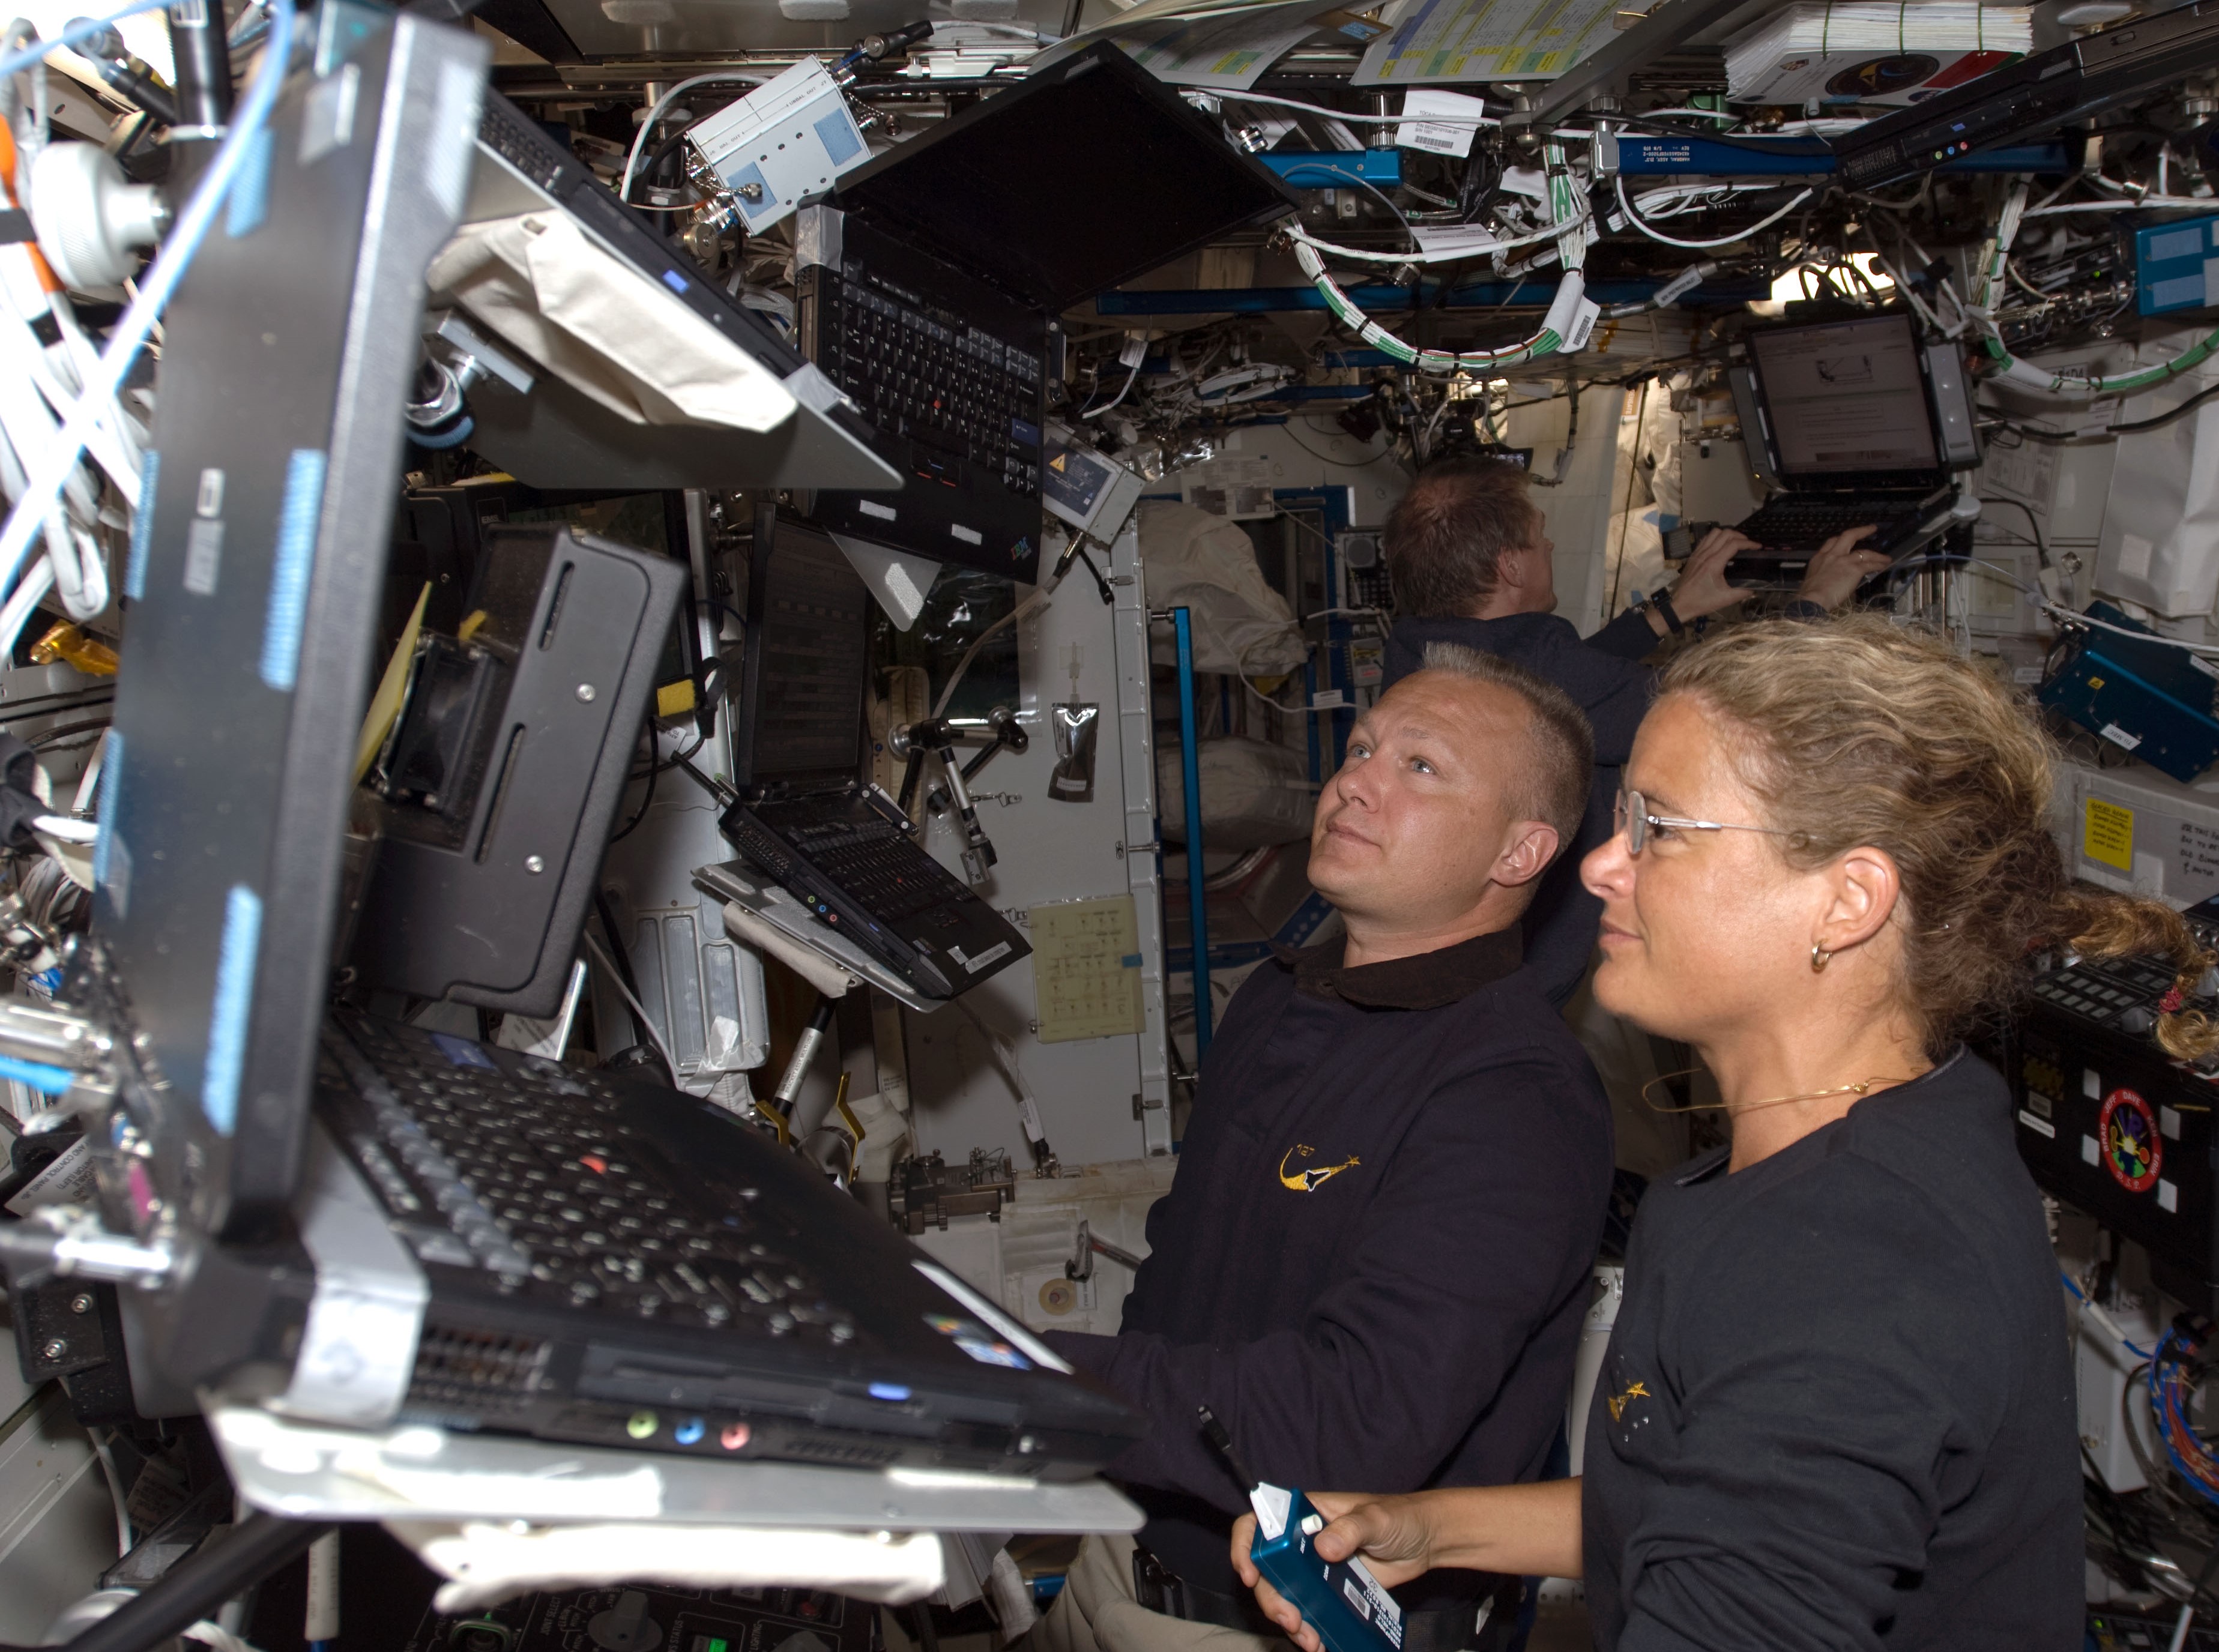 NASA astronaut Douglas G. Hurley, left, and Canadian Space Agency astronaut Julie Payette operate the station's robotic arm during the second spacewalk